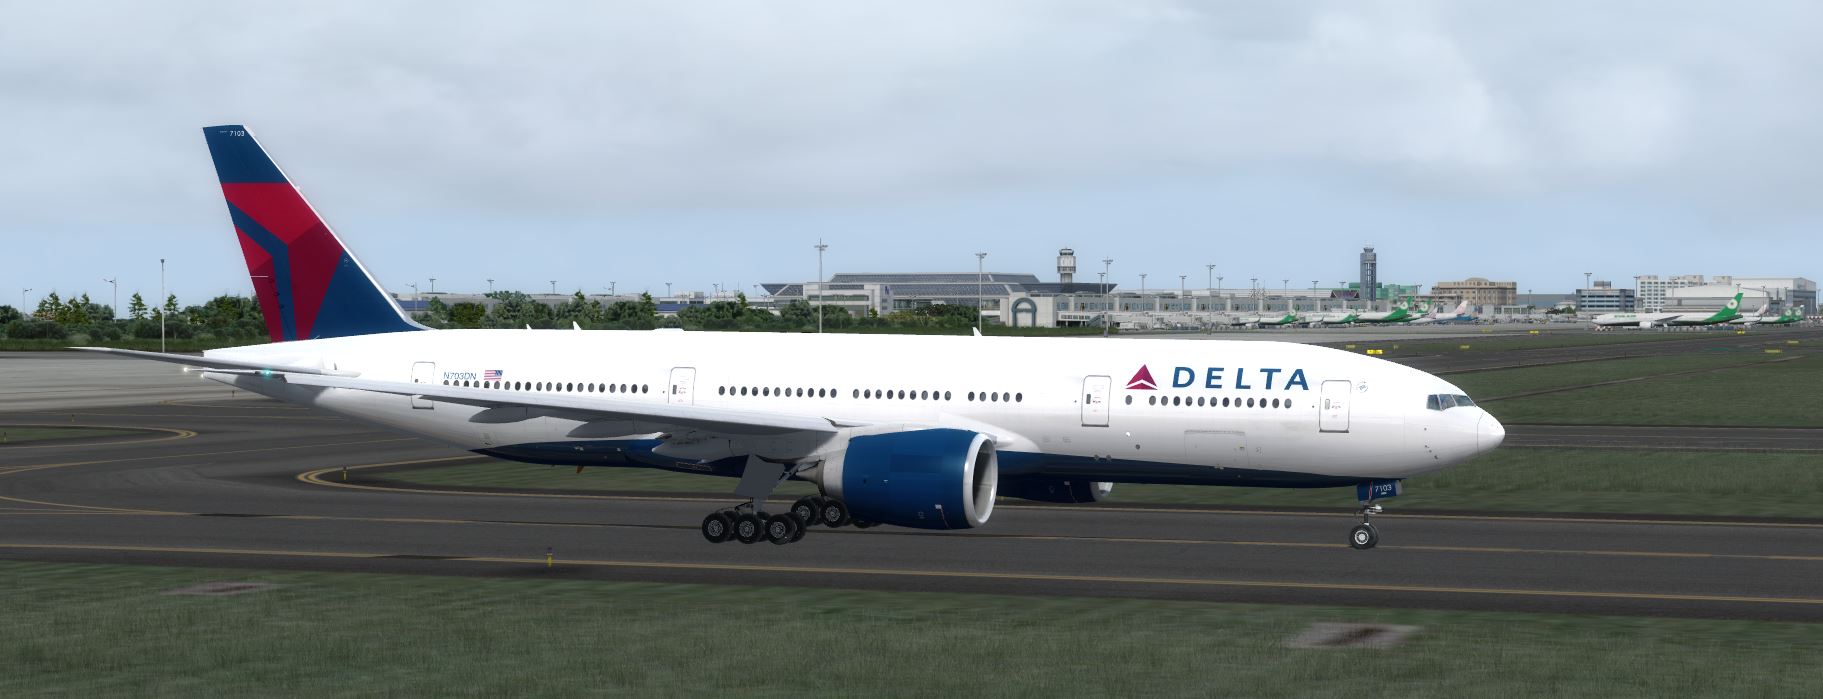 B777-200 Delta Airlines Standard Livery-712 